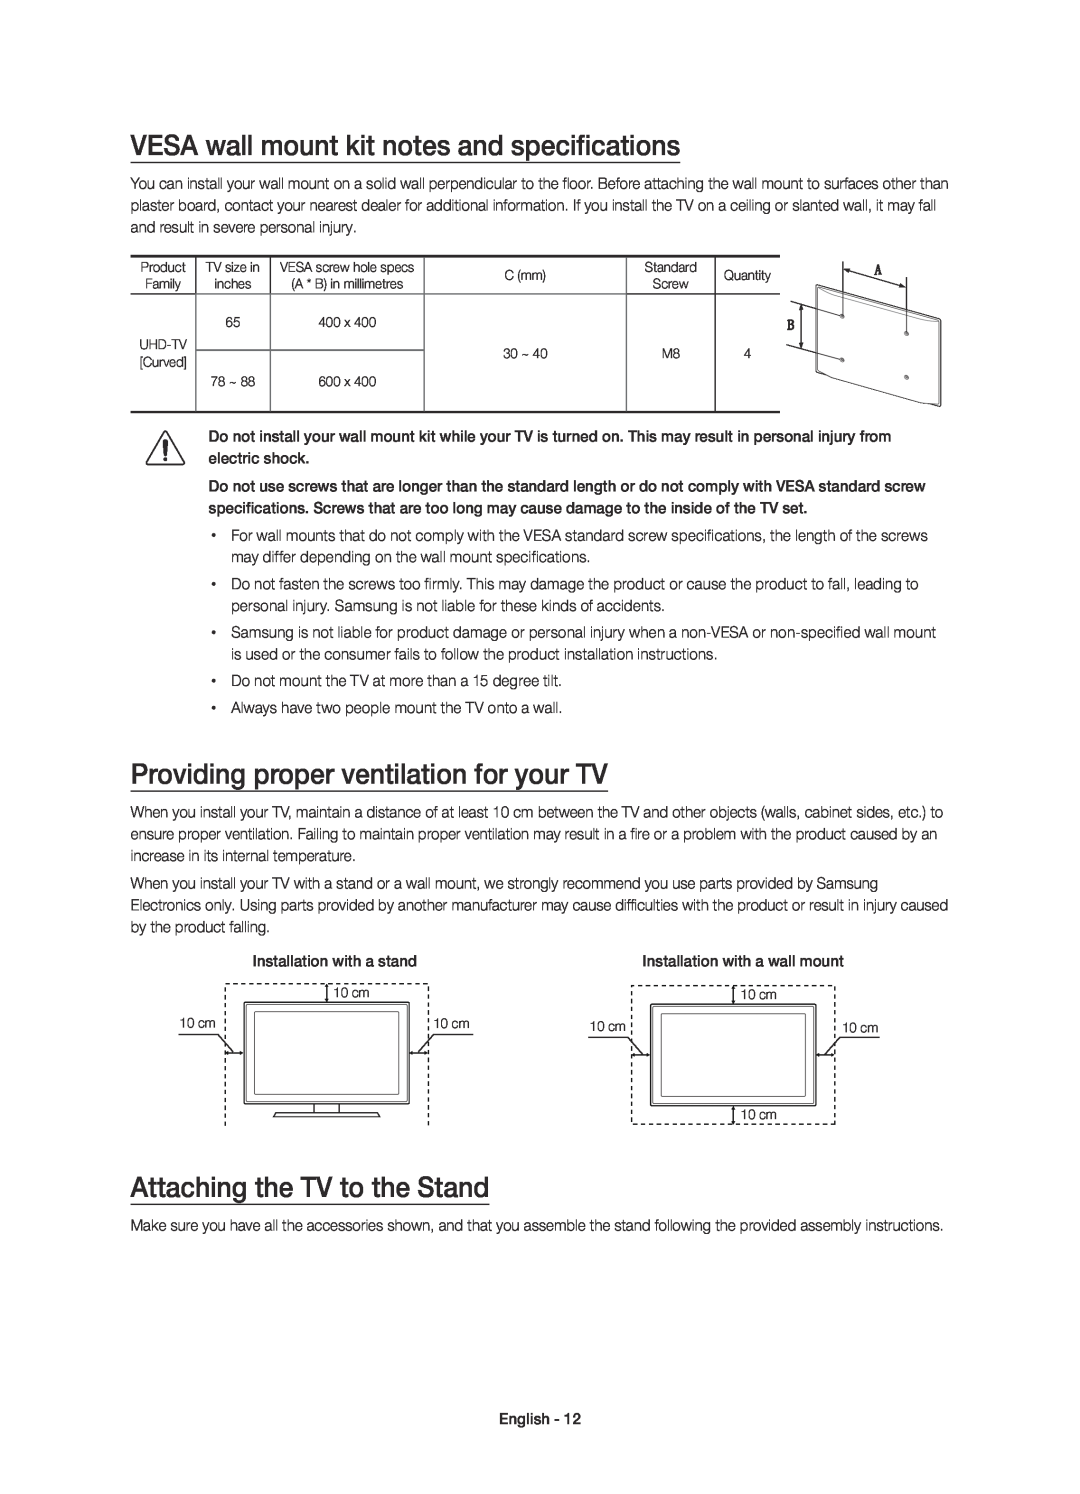 Samsung UE88JS9500TXZF manual VESA wall mount kit notes and specifications, Providing proper ventilation for your TV 